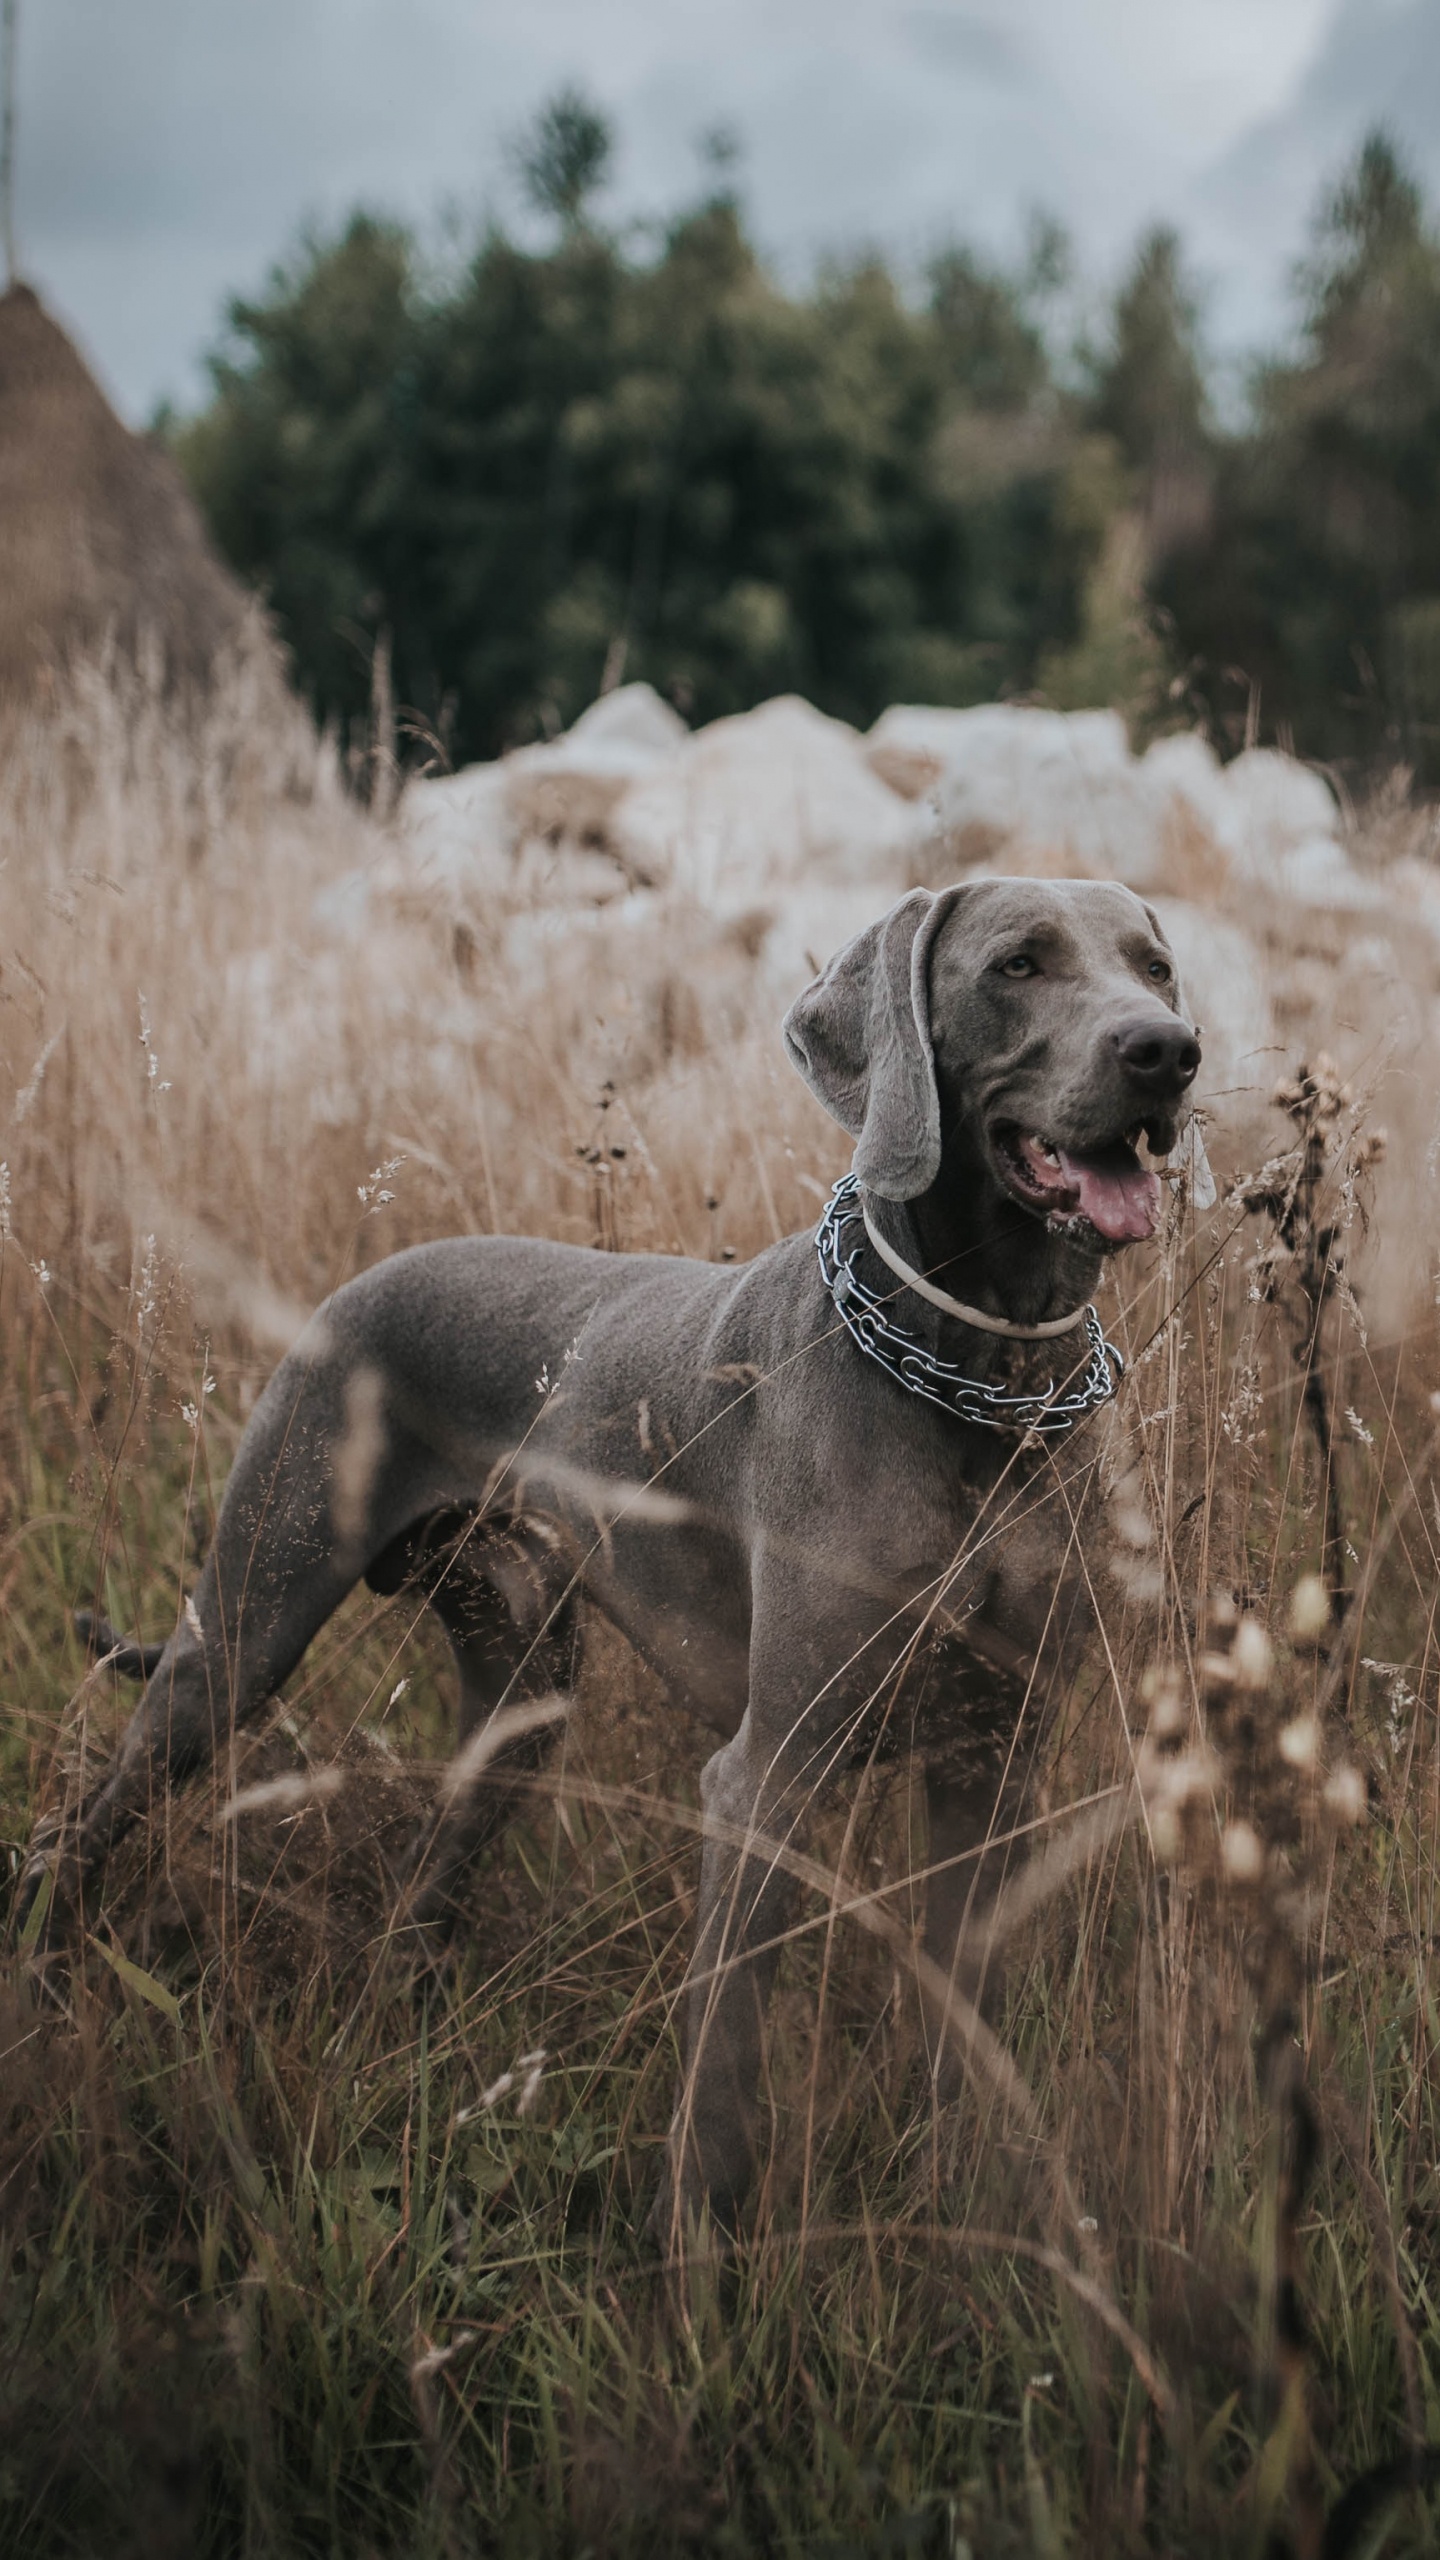 Gray Short Coated Dog on Brown Grass Field During Daytime. Wallpaper in 1440x2560 Resolution